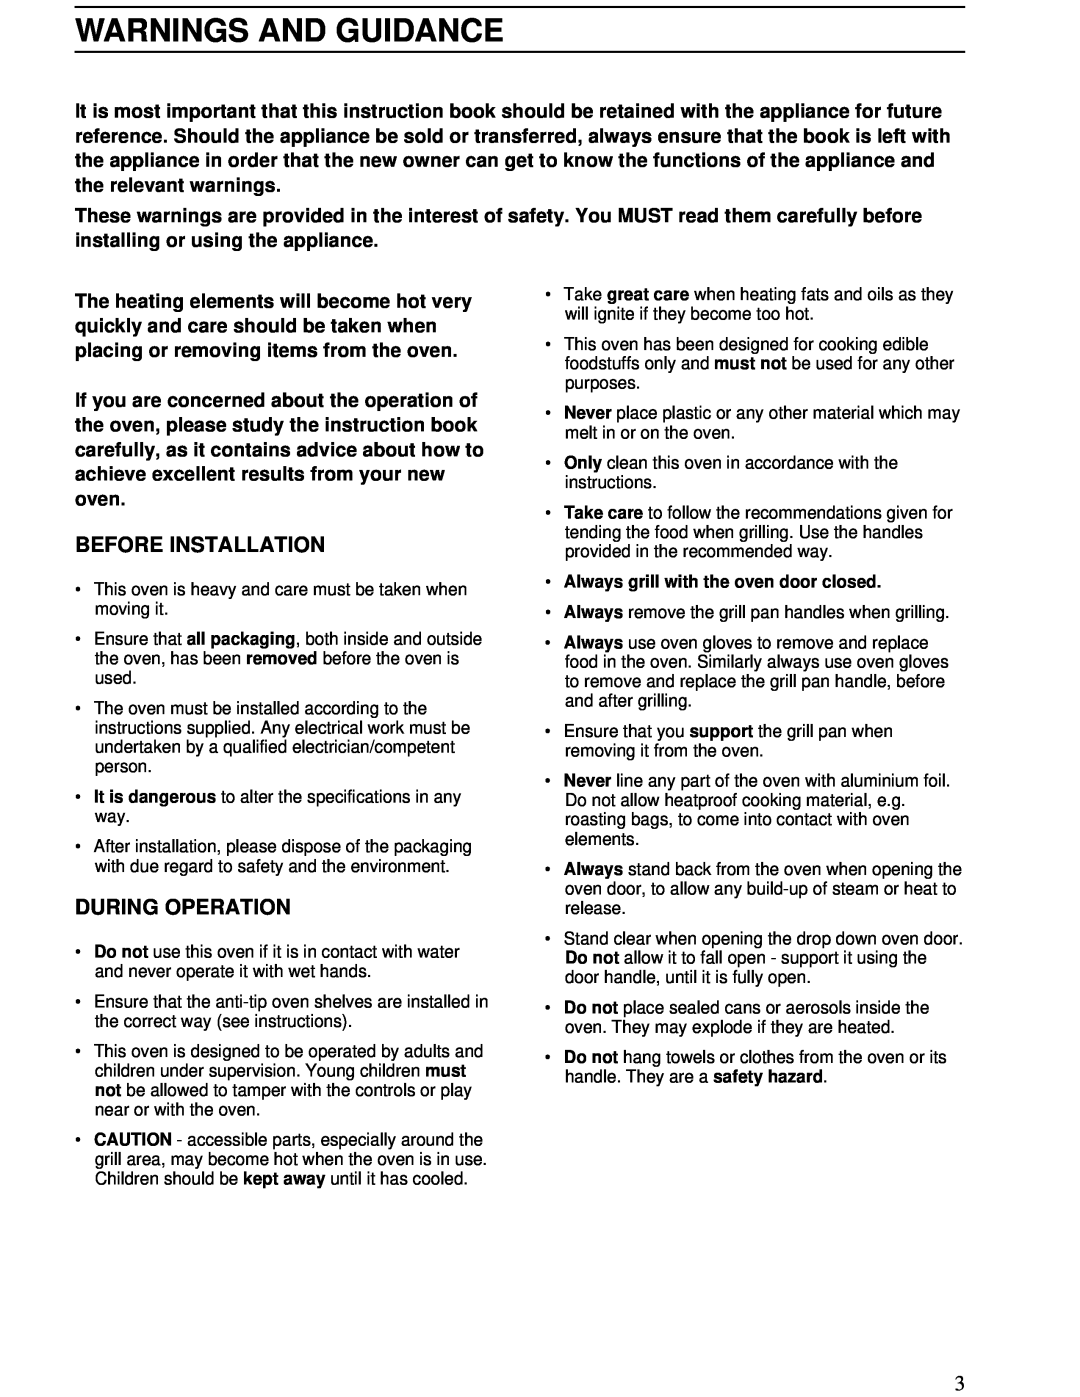 Zanussi ZBD 902 installation manual Warnings And Guidance, Before Installation, During Operation 